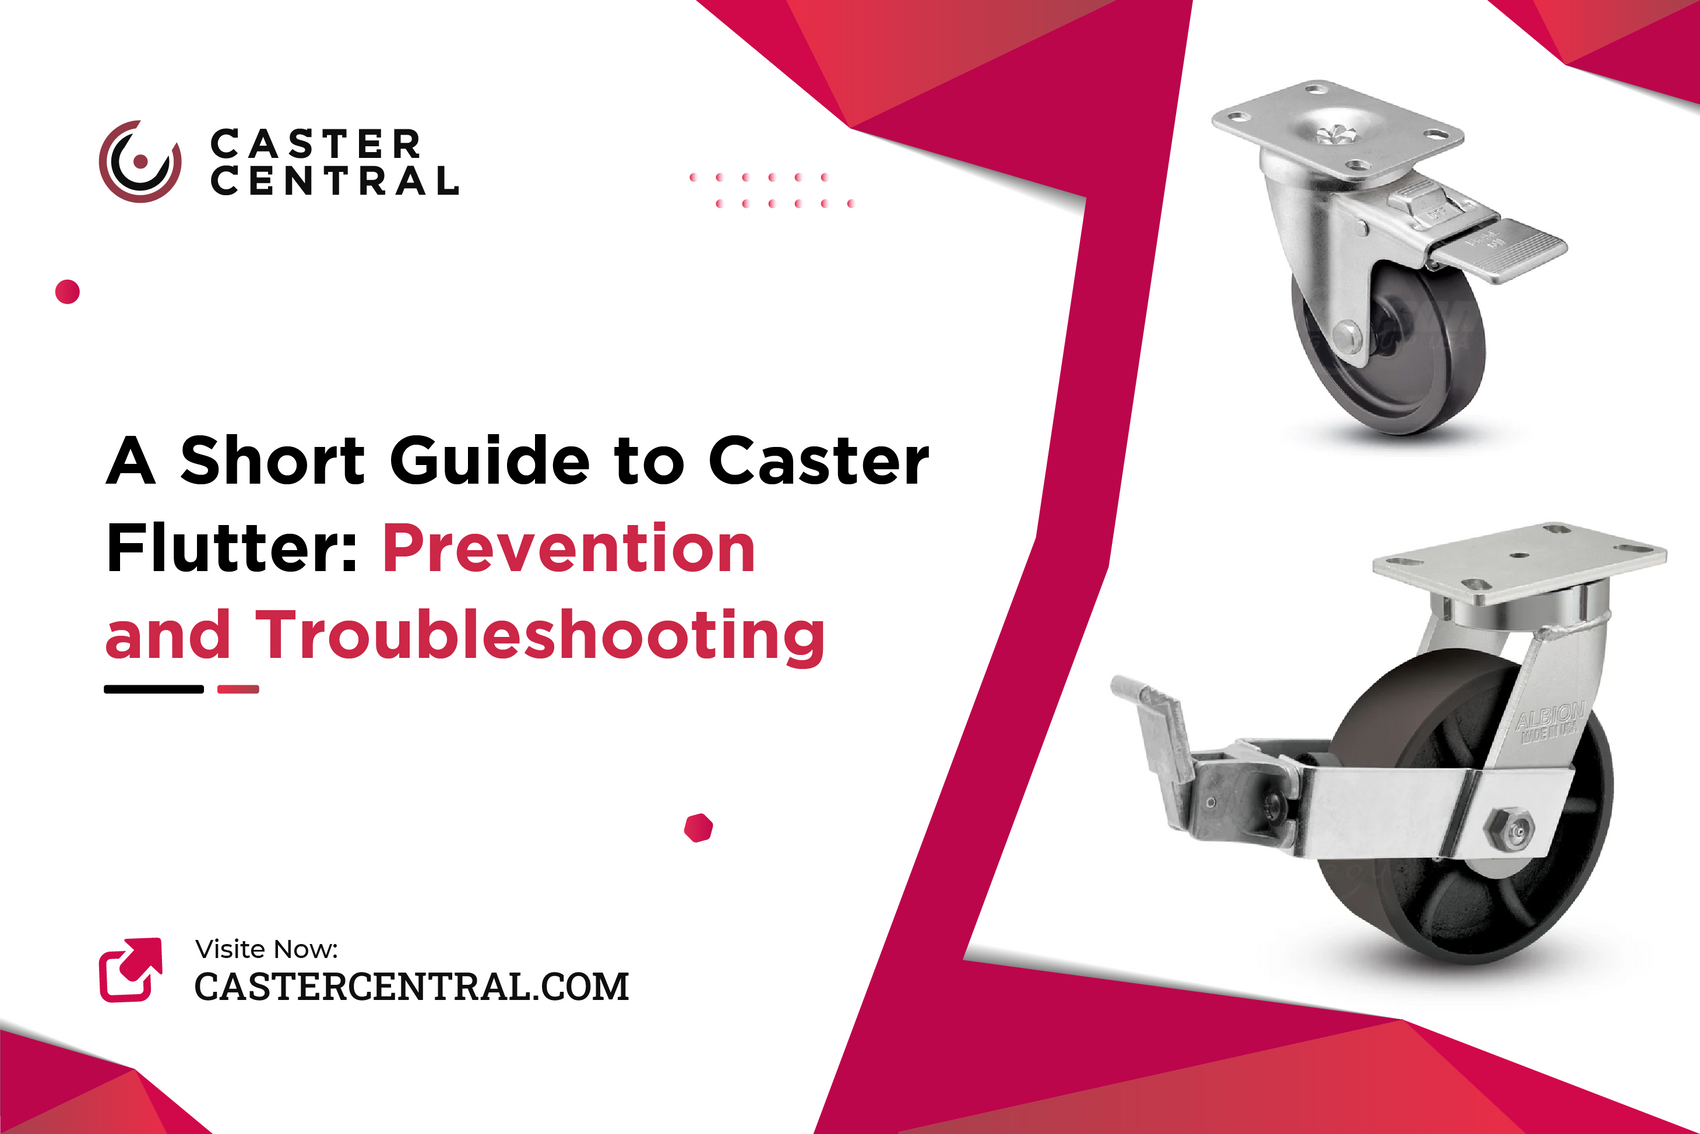 A Short Guide to Caster Flutter: Prevention and Troubleshooting